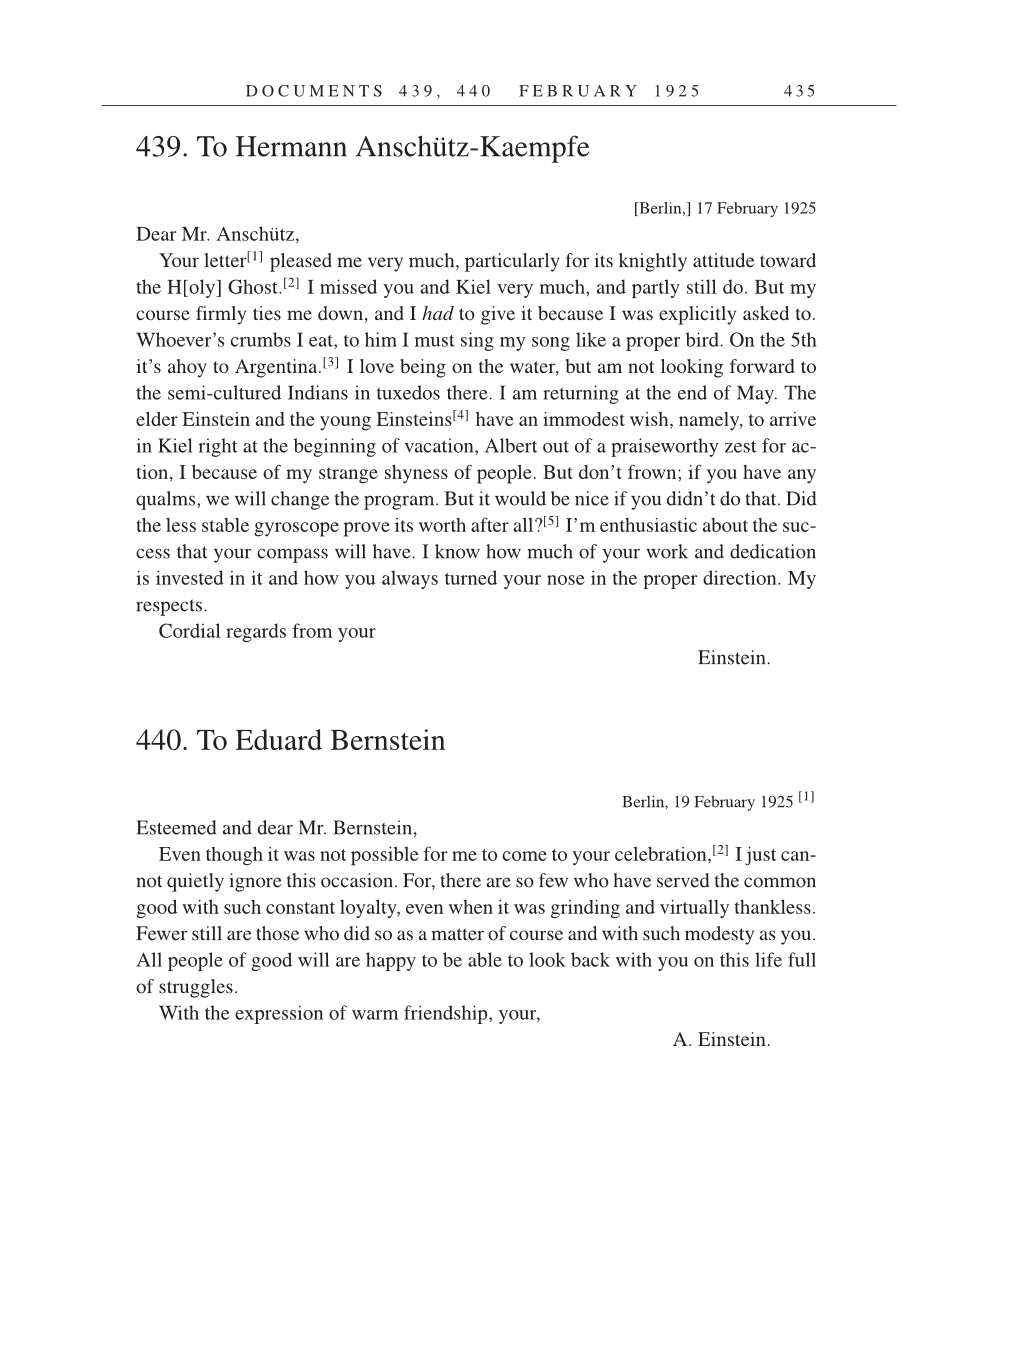 Volume 14: The Berlin Years: Writings & Correspondence, April 1923-May 1925 (English Translation Supplement) page 435